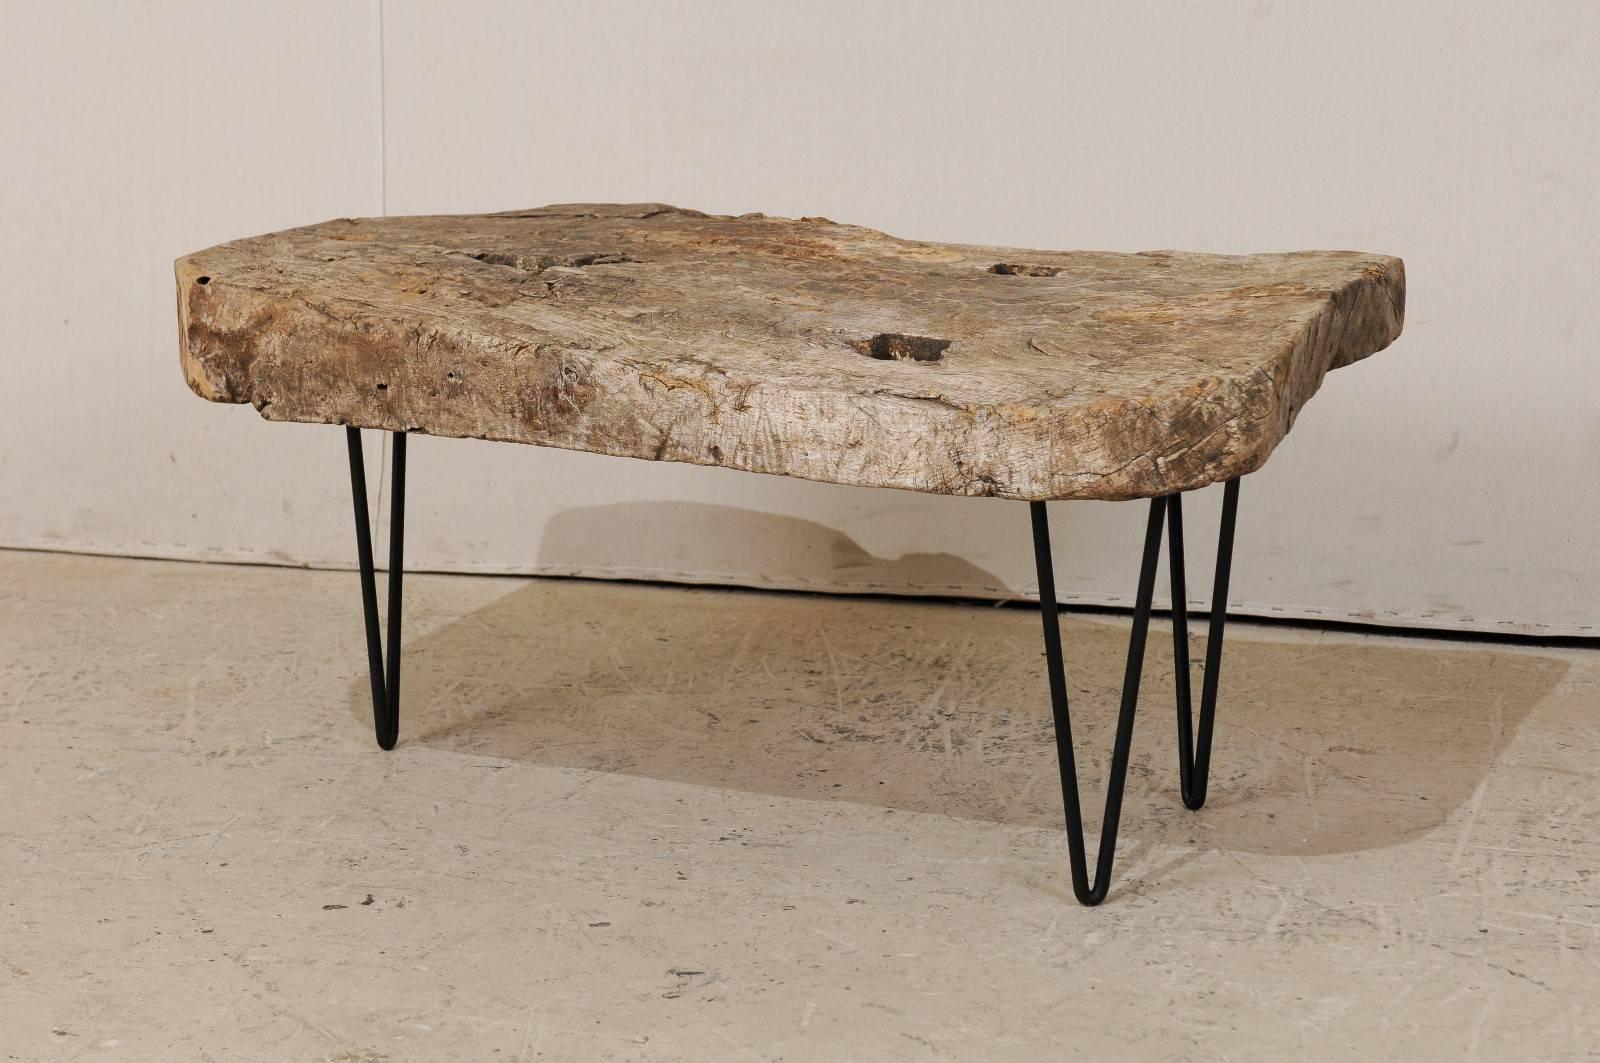 A custom coffee table of old Spanish wood. This rustic yet chic coffee table is made up from the top of a 19th century Spanish work table. The holes within the tabletop are where the feet were originally attached, and gives the top great character.